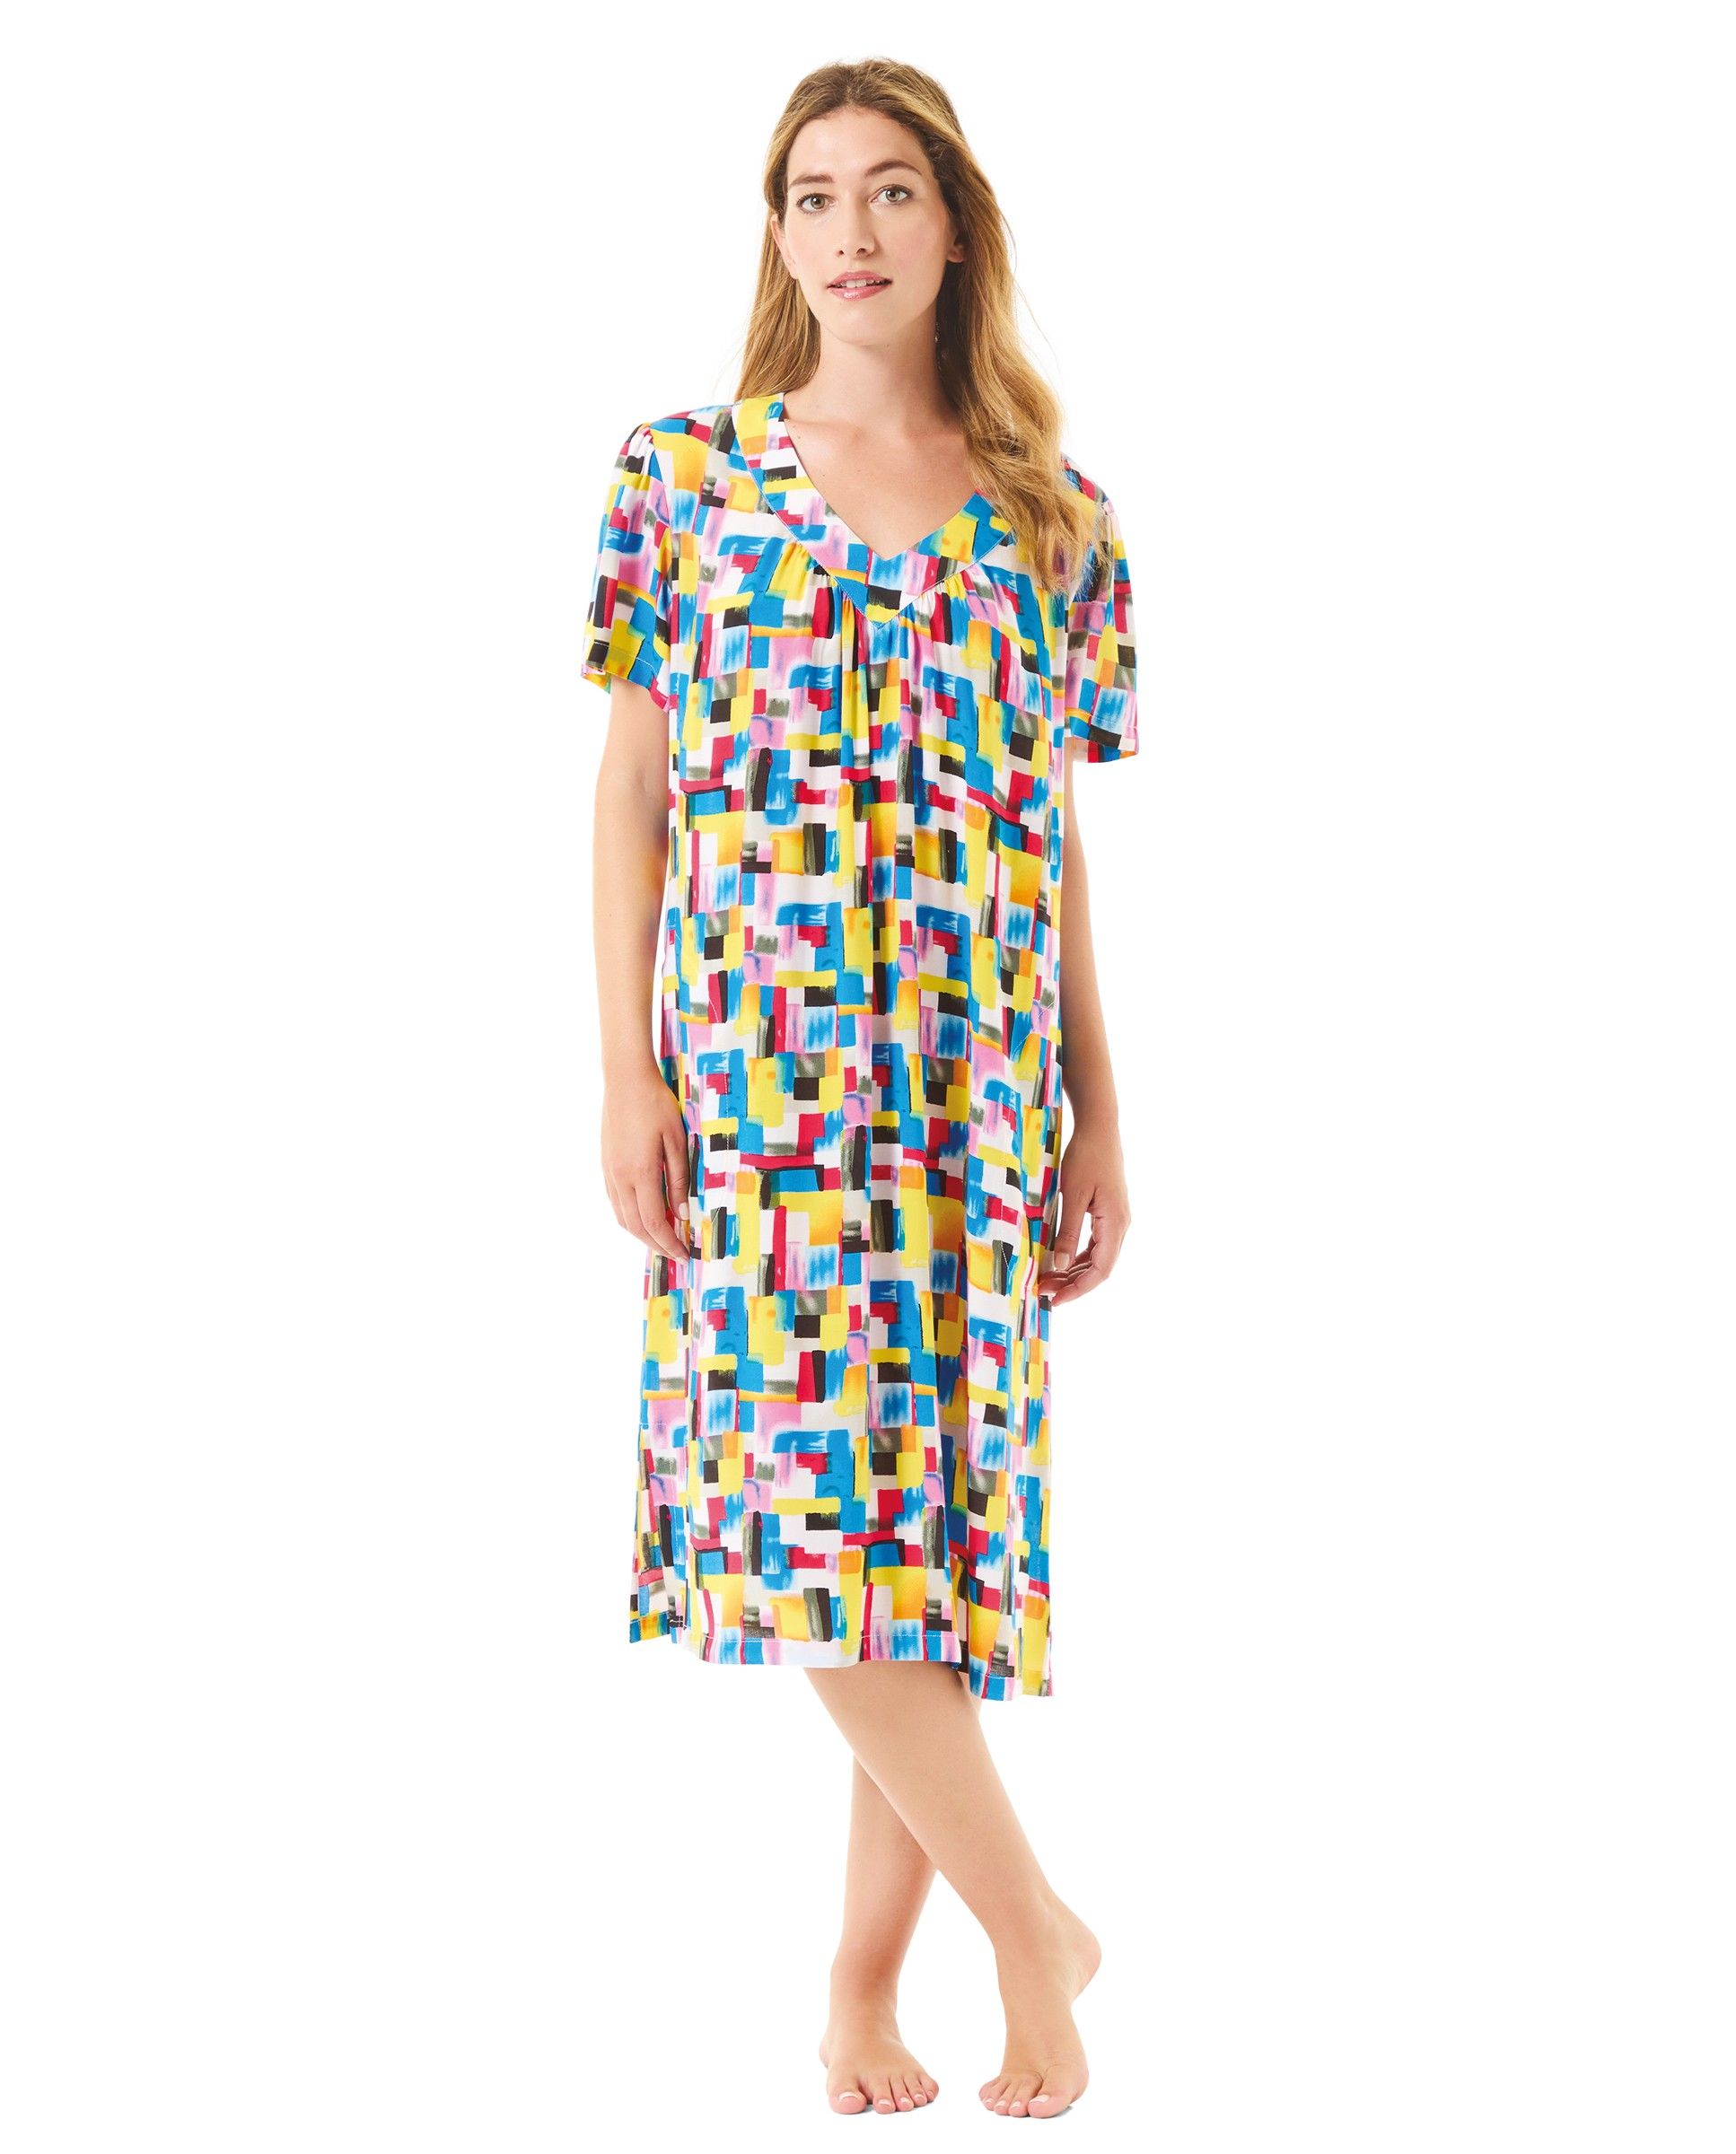 Woman wears short-sleeved summer dress with colourful geometric print